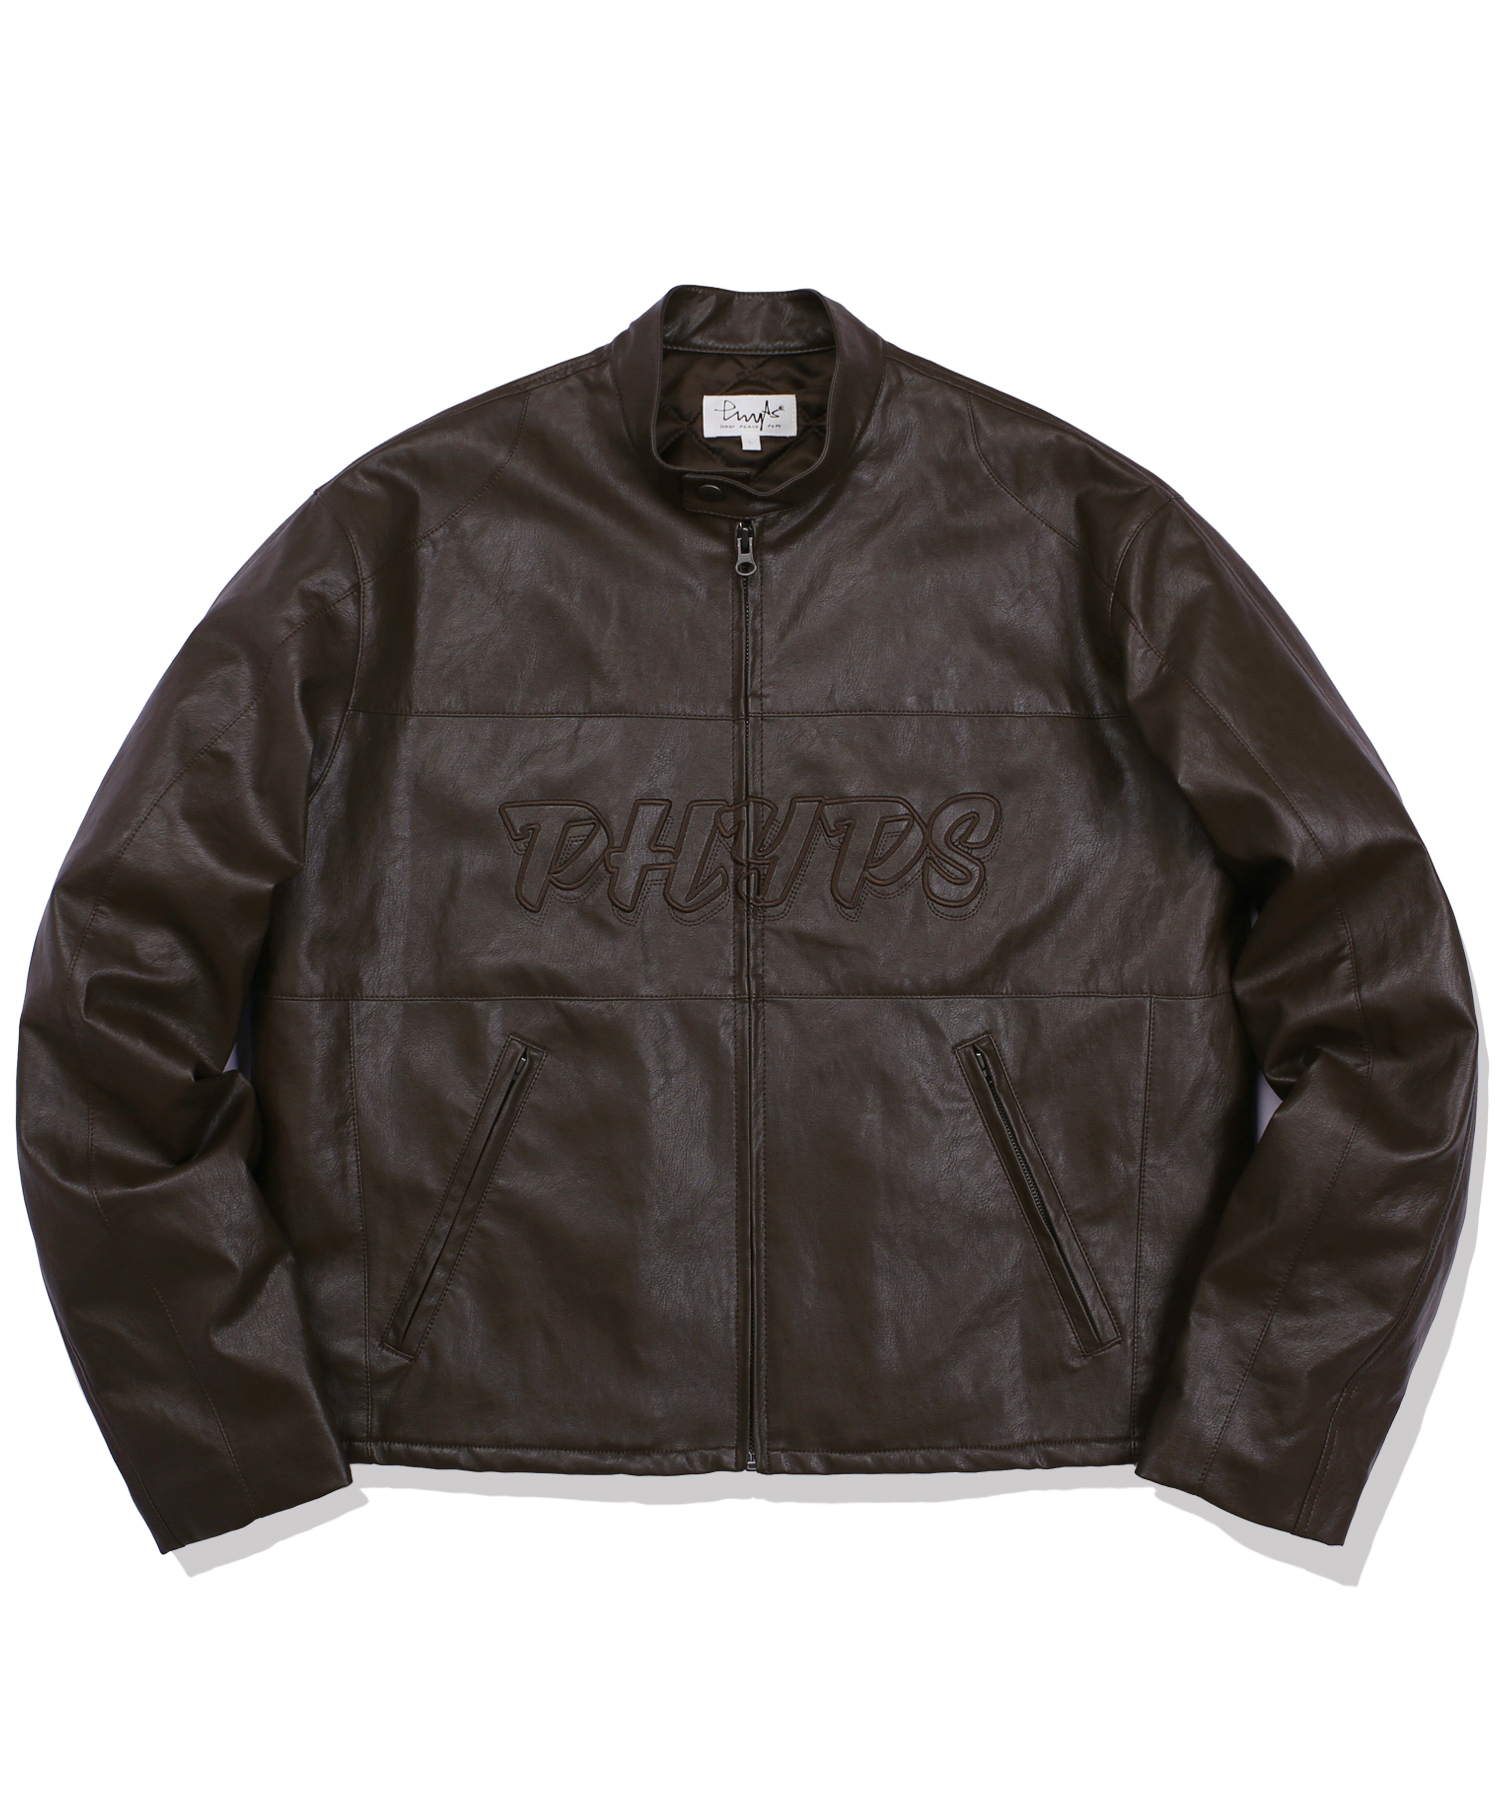 PHYPS® LEATHER MOTORCYCLE JACKET BROWN